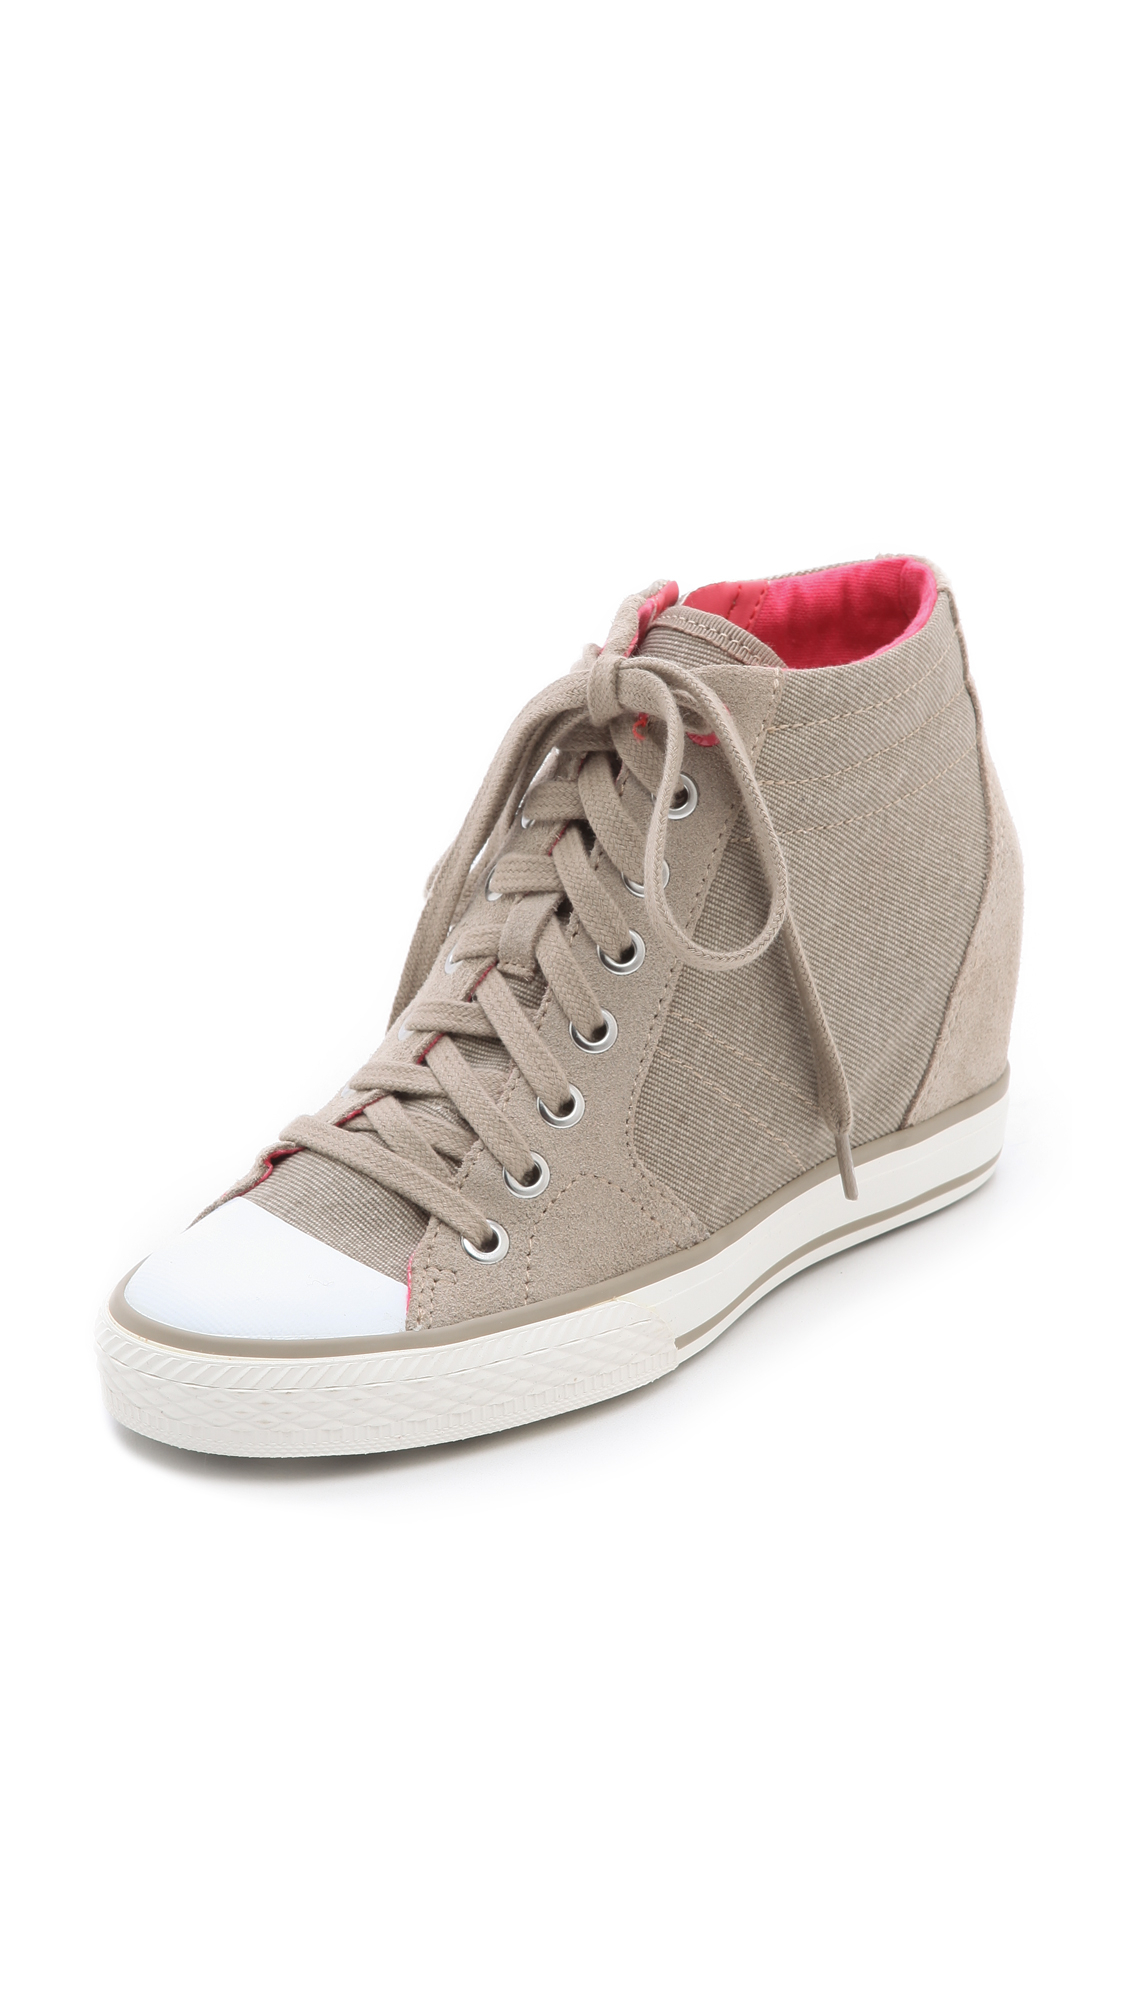 Buy DKNY women cosmos wedge sneaker pink Online | Brands For Less